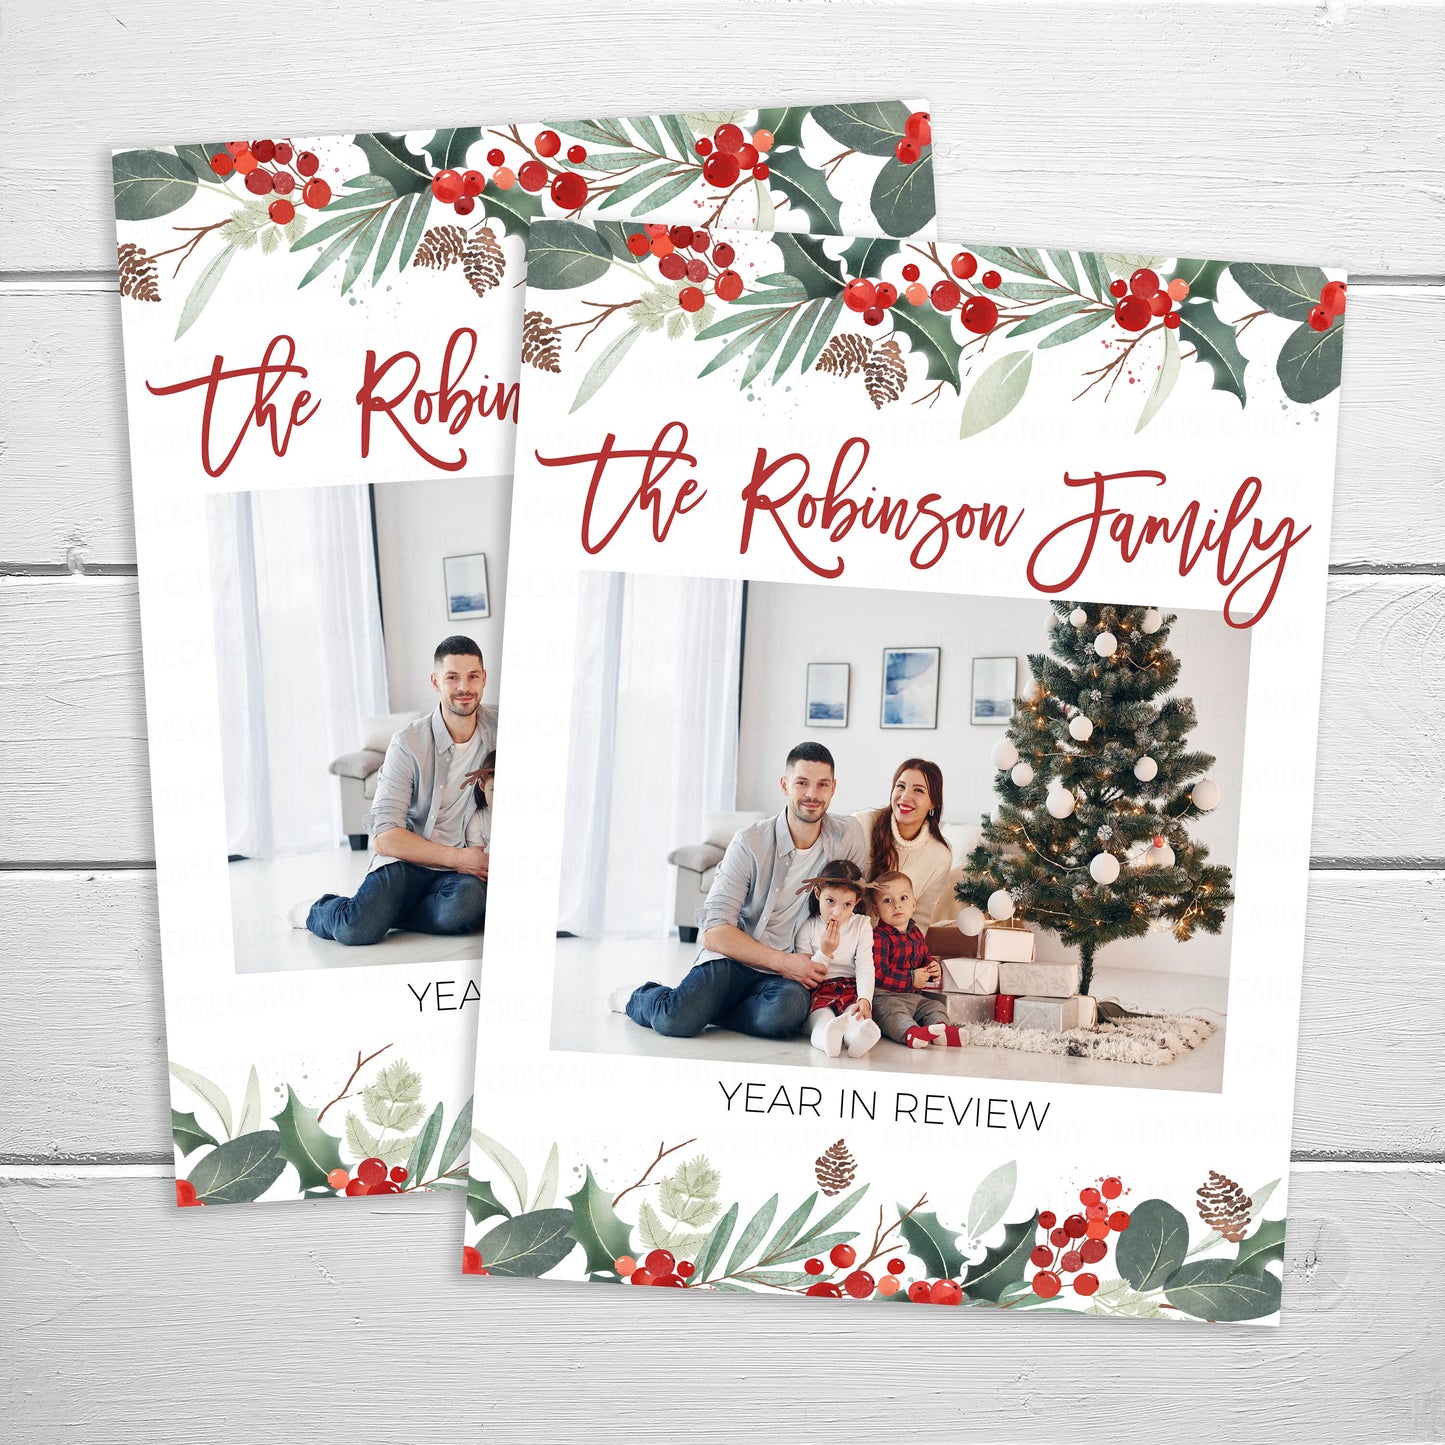 Christmas Newsletter Year In Review Template, Annual Family Christmas Holiday Letter, All About Our Year, Christmas Card Digital Template